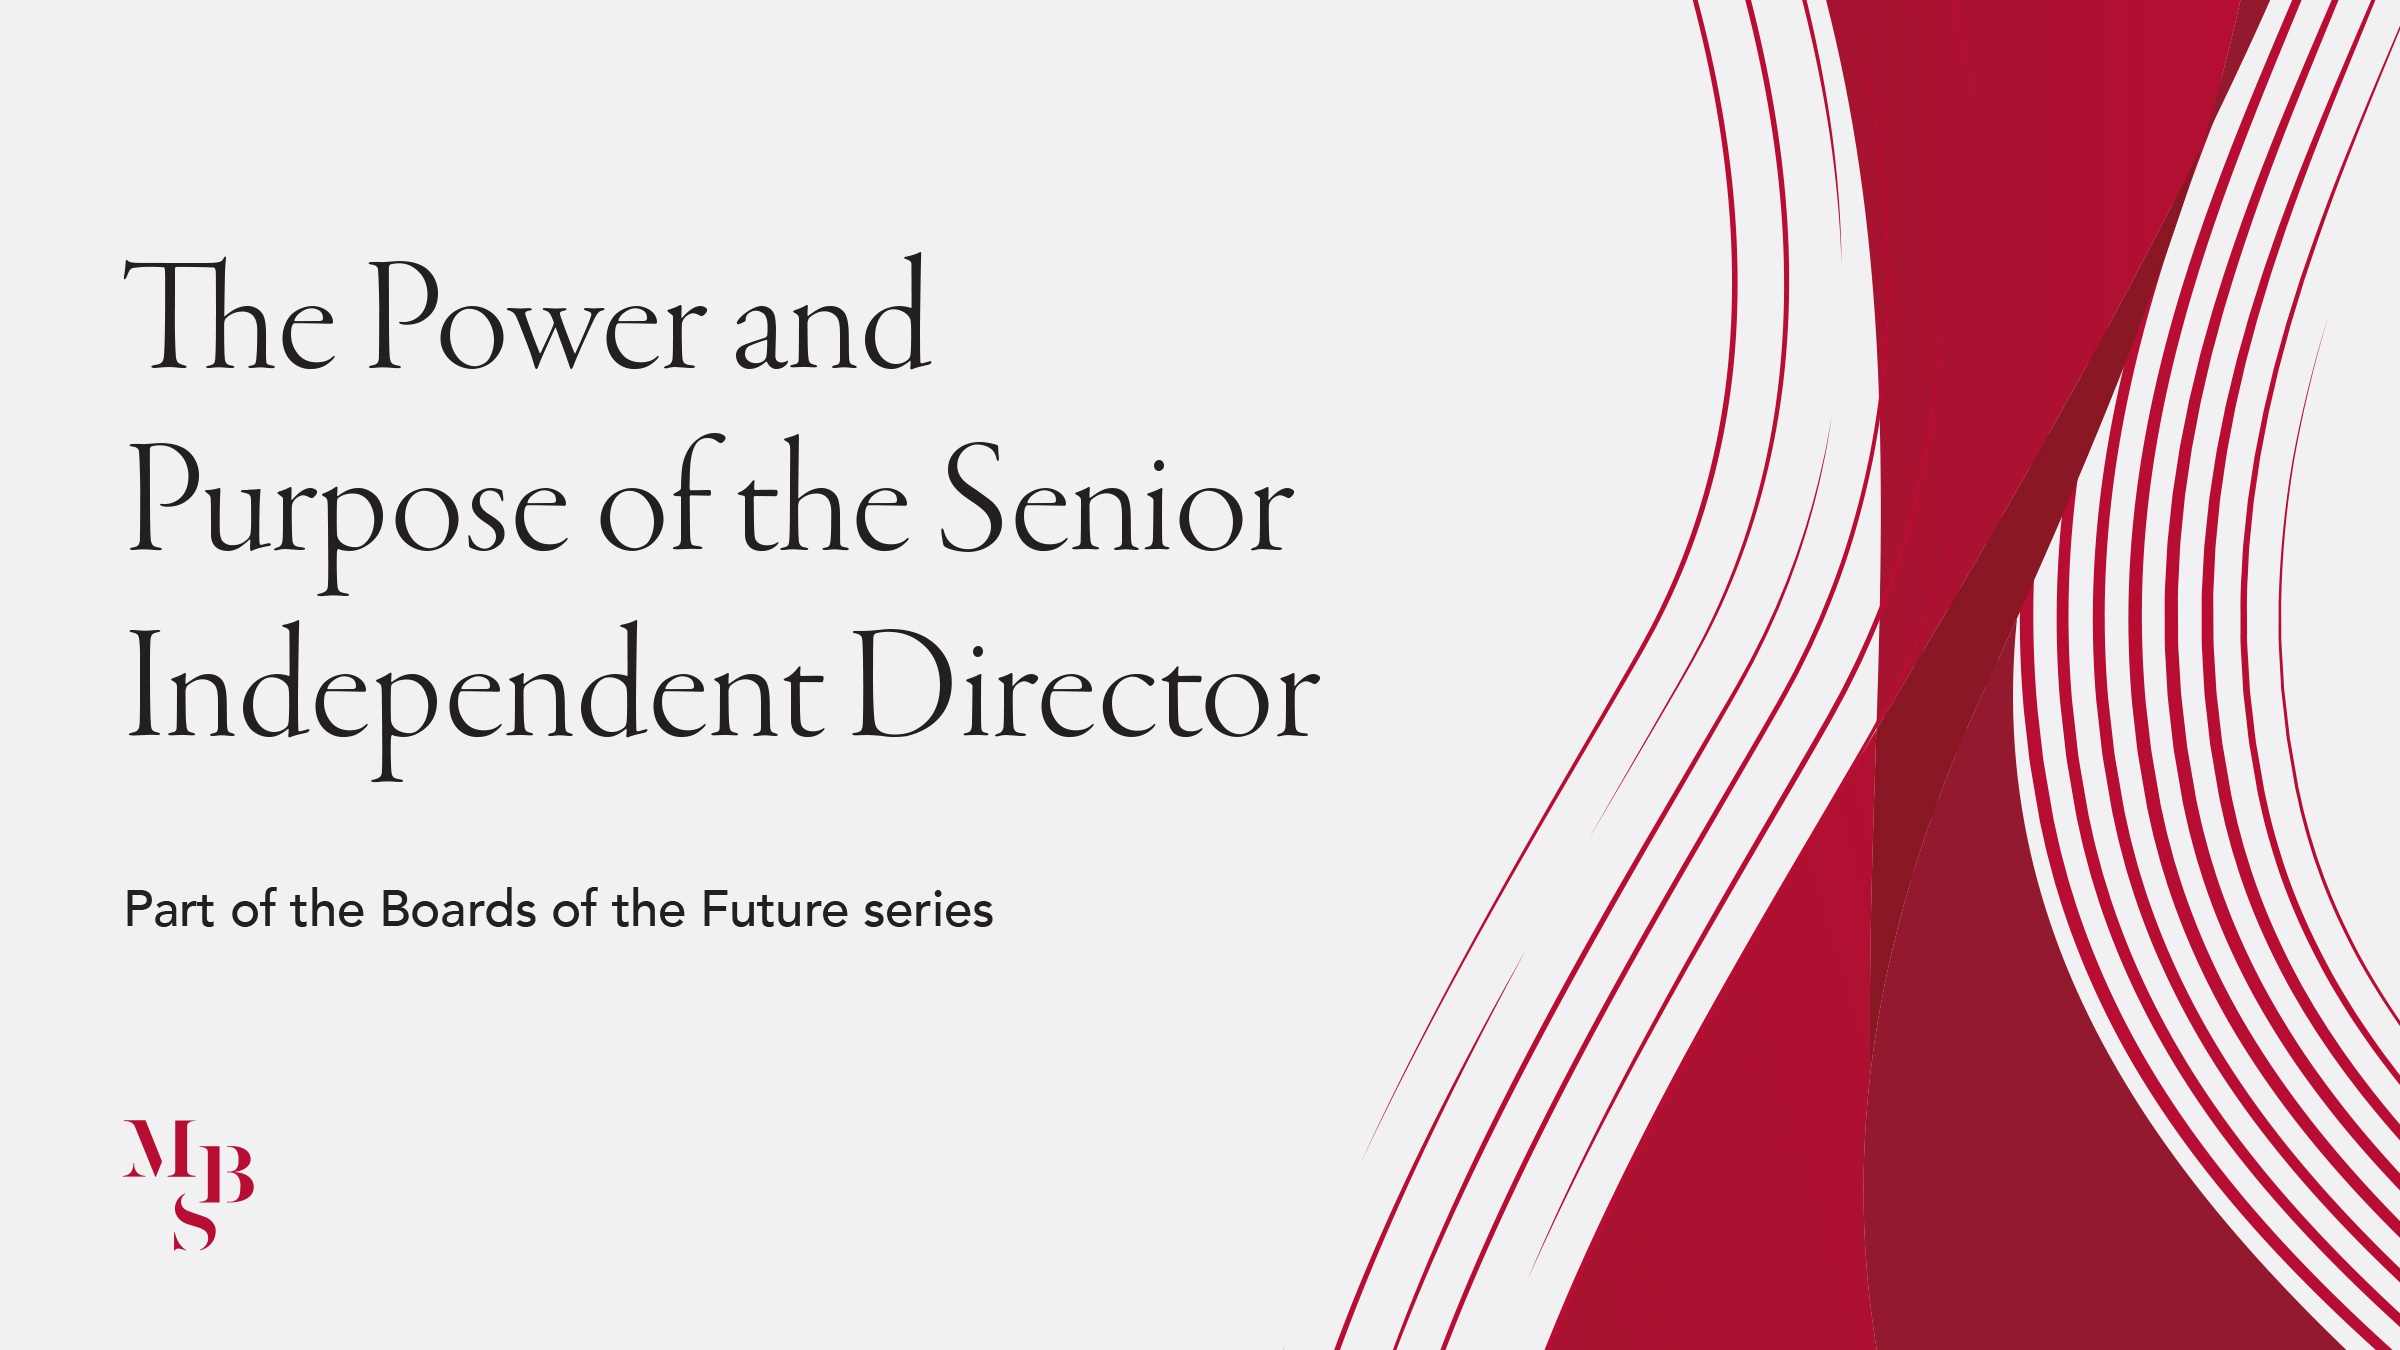 The Power and Purpose of the Senior Independent Director